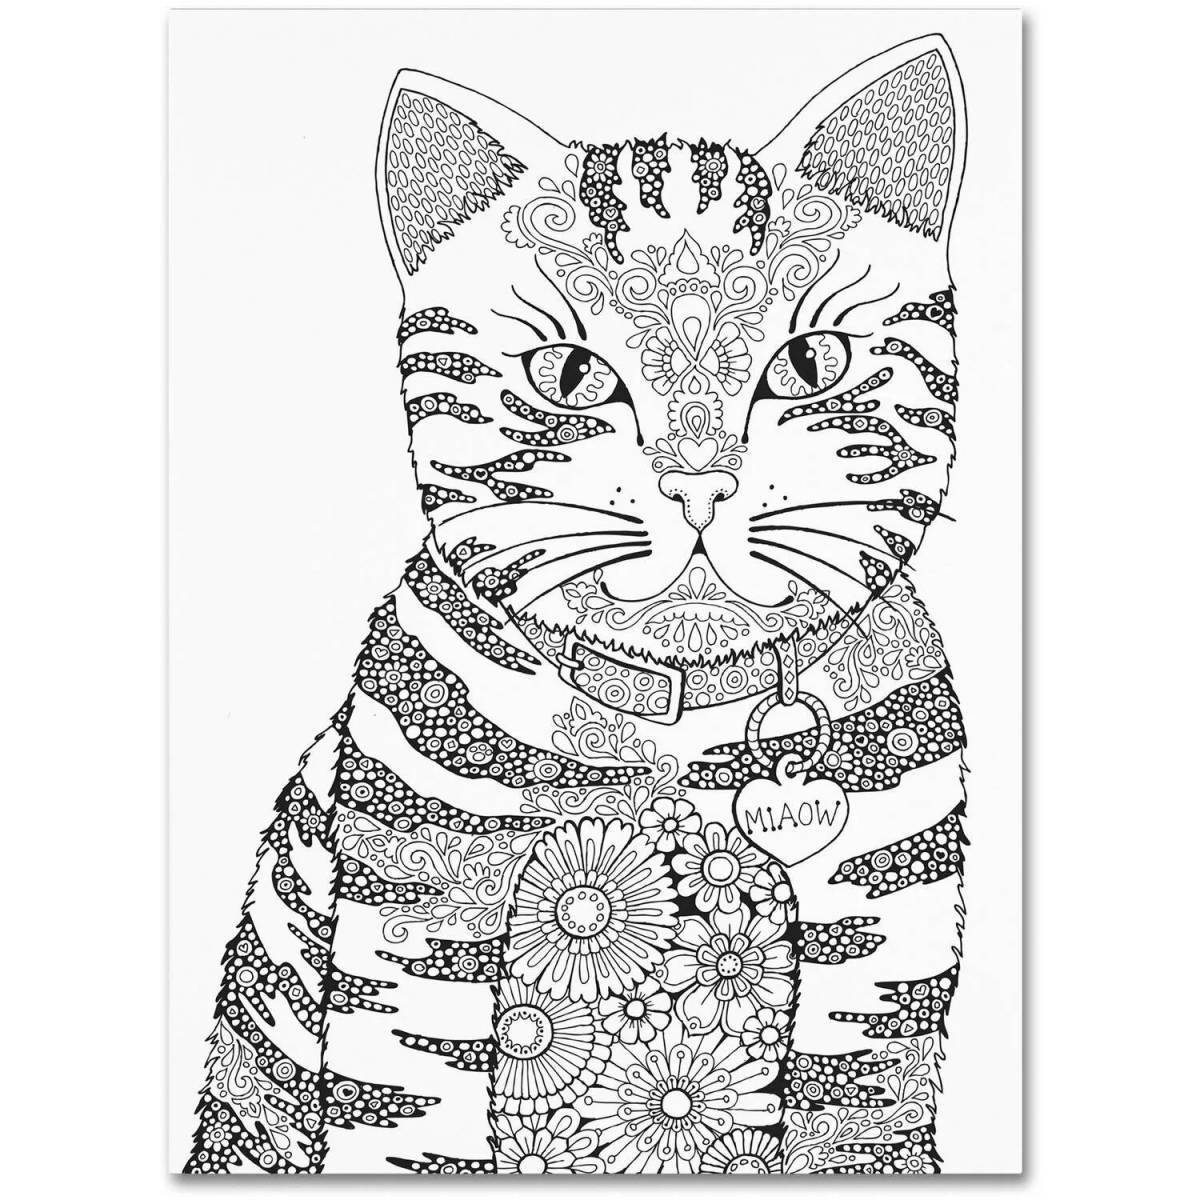 Gorgeous spiral cat coloring page